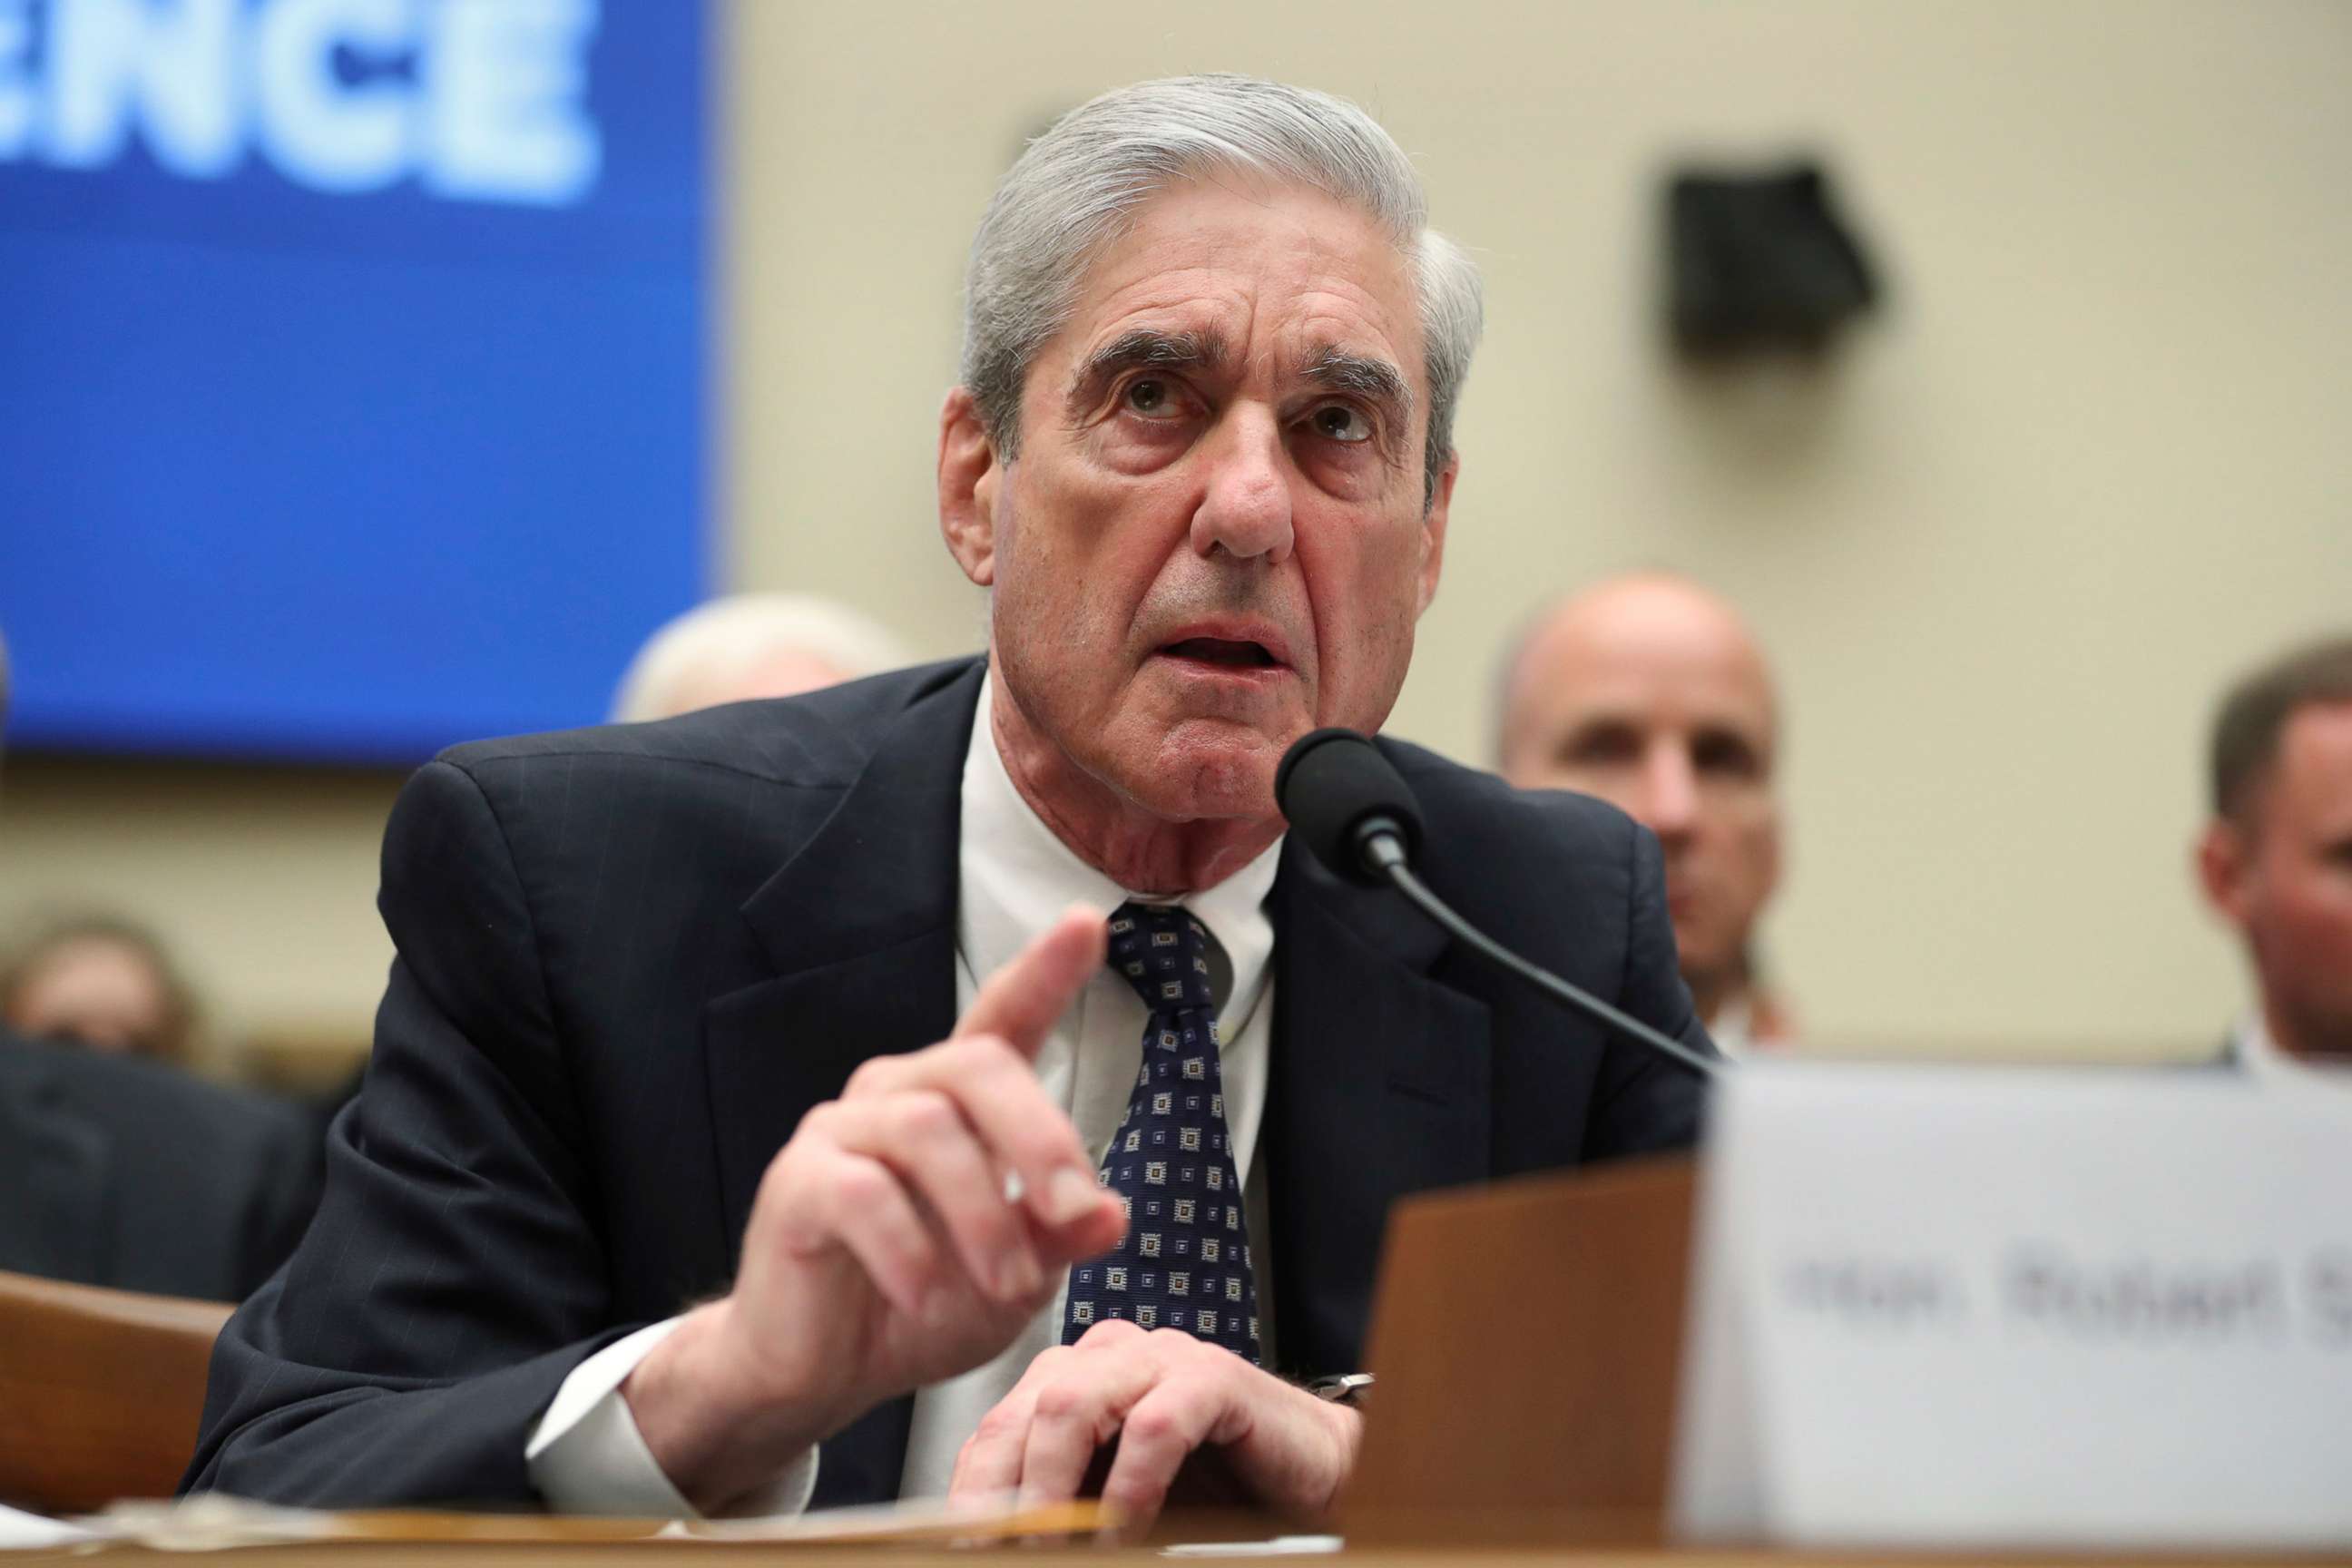 PHOTO: Former special counsel Robert Mueller testifies before the House Intelligence Committee hearing on his report on Russian election interference, in Washington, D.C., July 24, 2019.